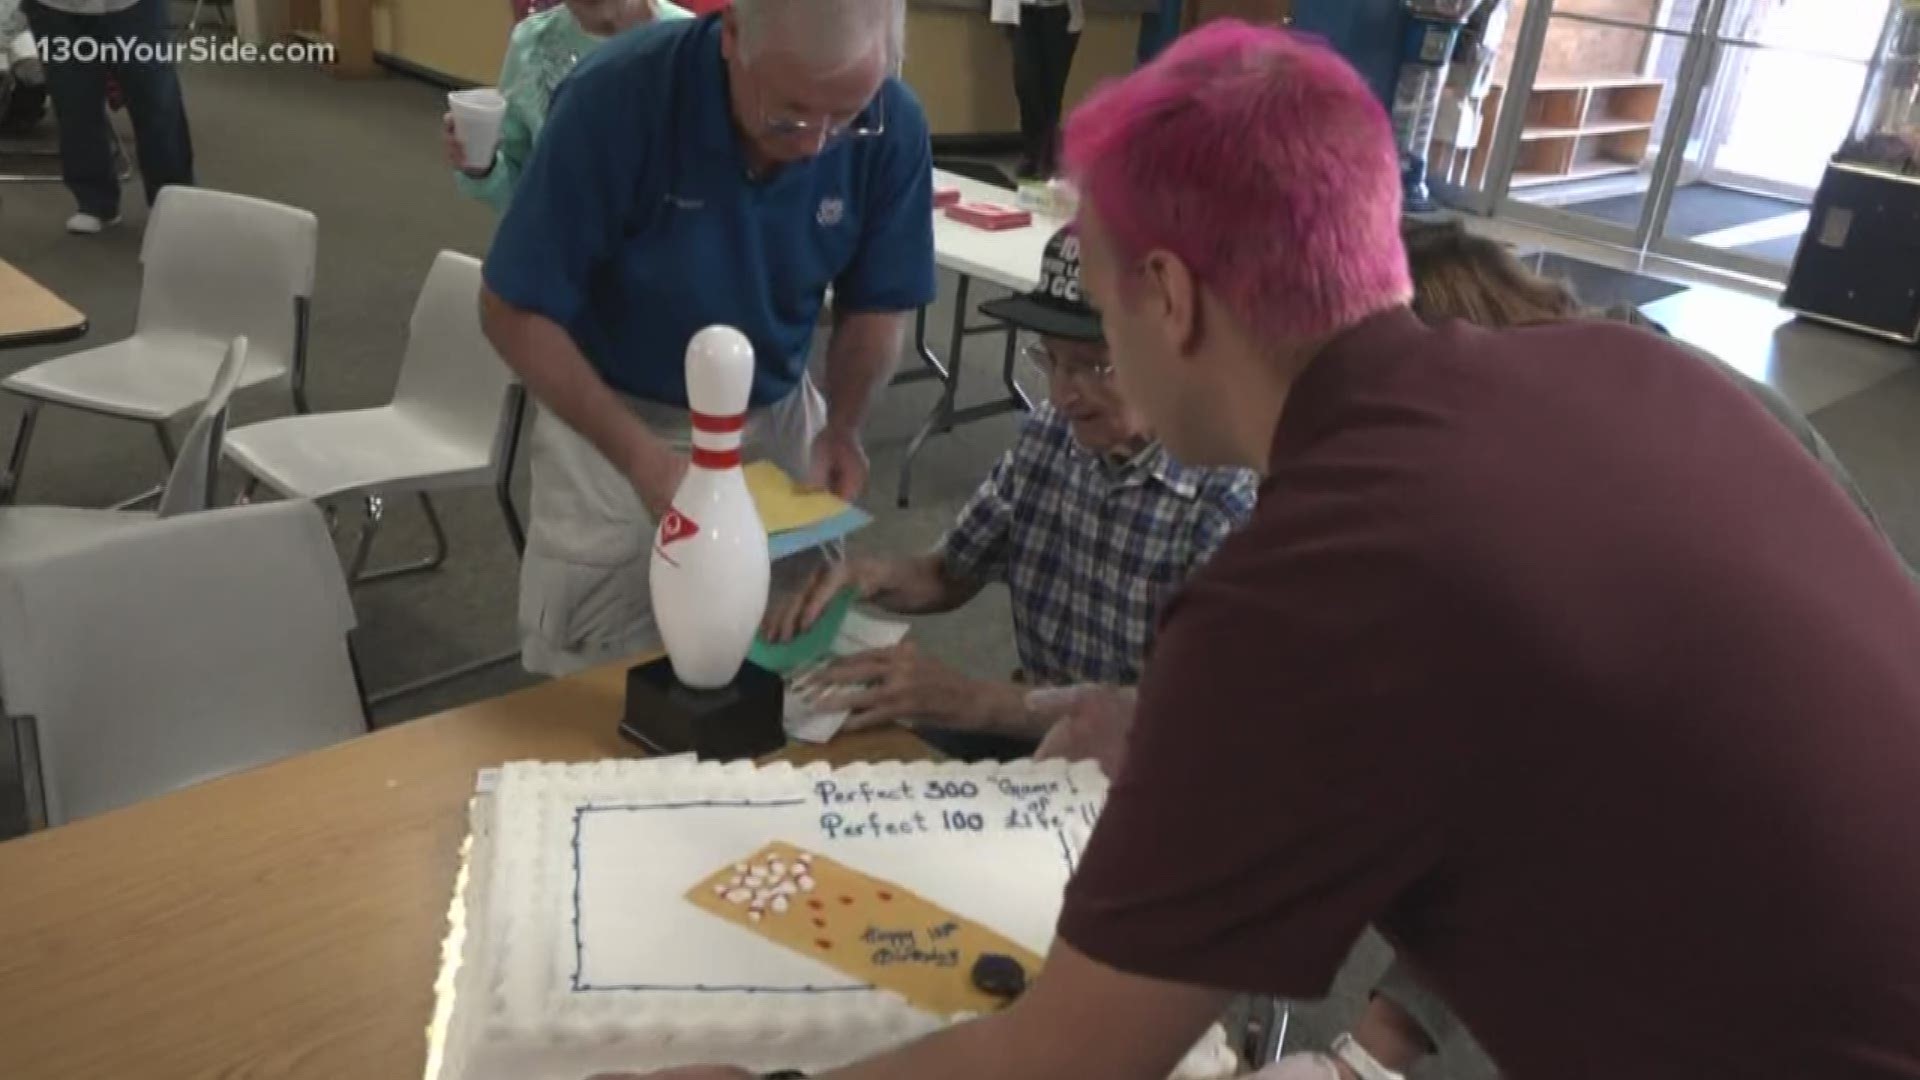 John Sinke is turning 100 years old on Saturday. Today, the members of his bowling league threw him a little party.